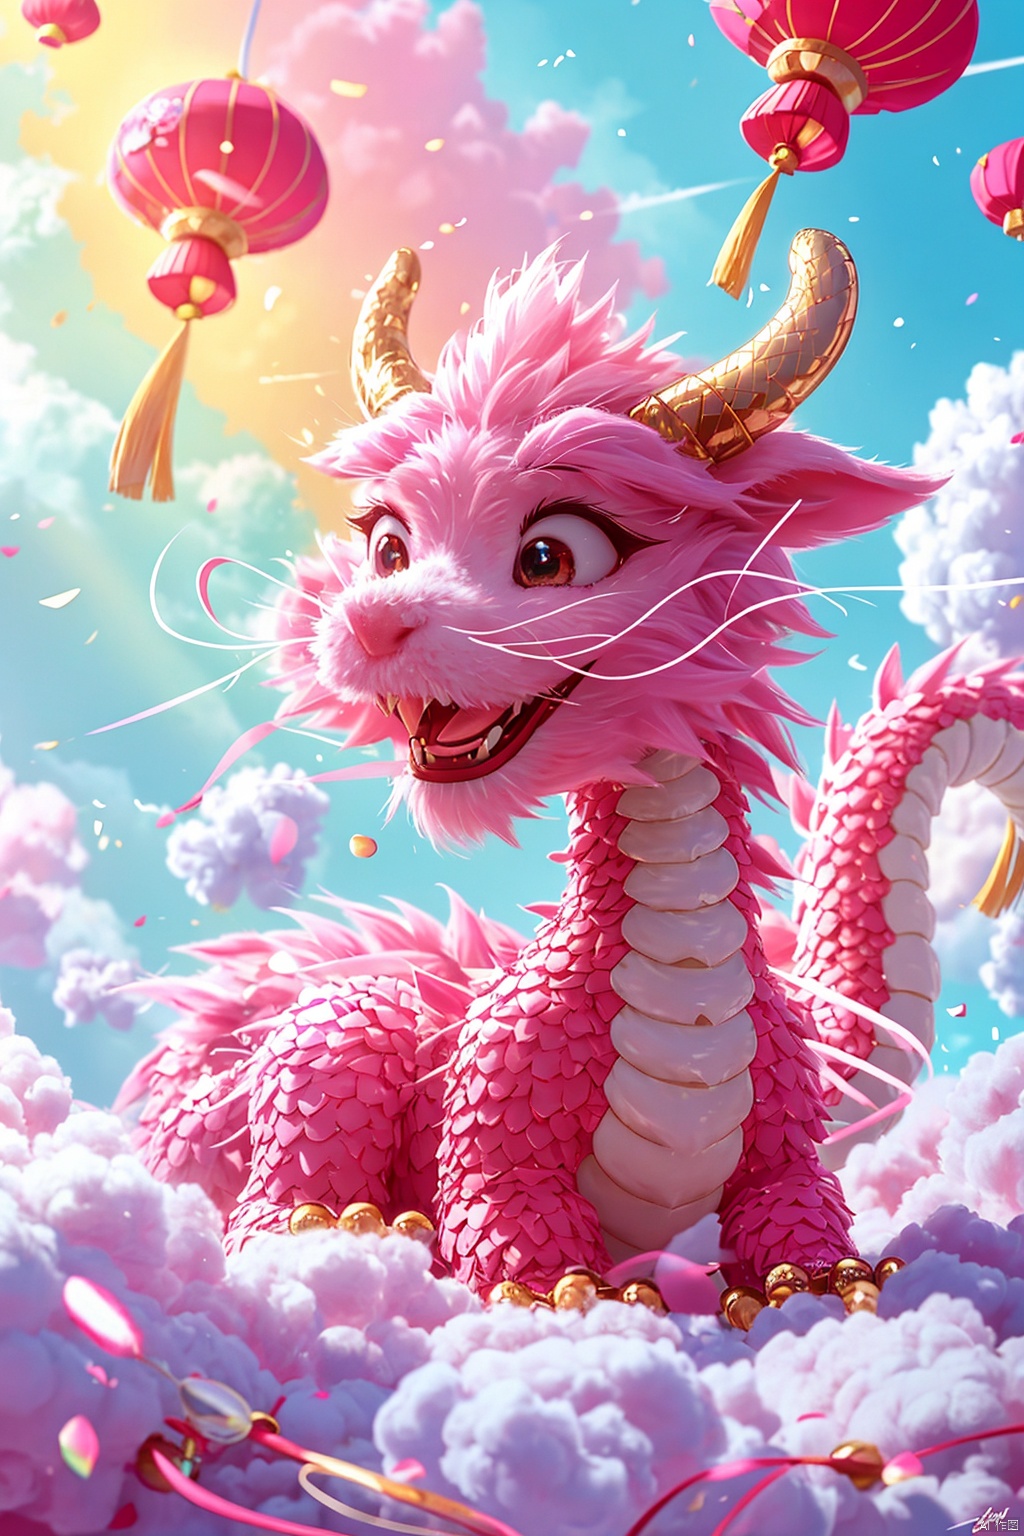 Masterpiece, high-quality, Pixar animated style, a cute Chinese dragon, cape, with a brilliant smile. Cotton candy material, its tail is like a cloud, and a rainbow cloud floats on its head. Pink flowers, pink sky, soft light, POV perspective, rich details, realistic details, light blue or light red, strong close-up, surrealistic illustrations,

